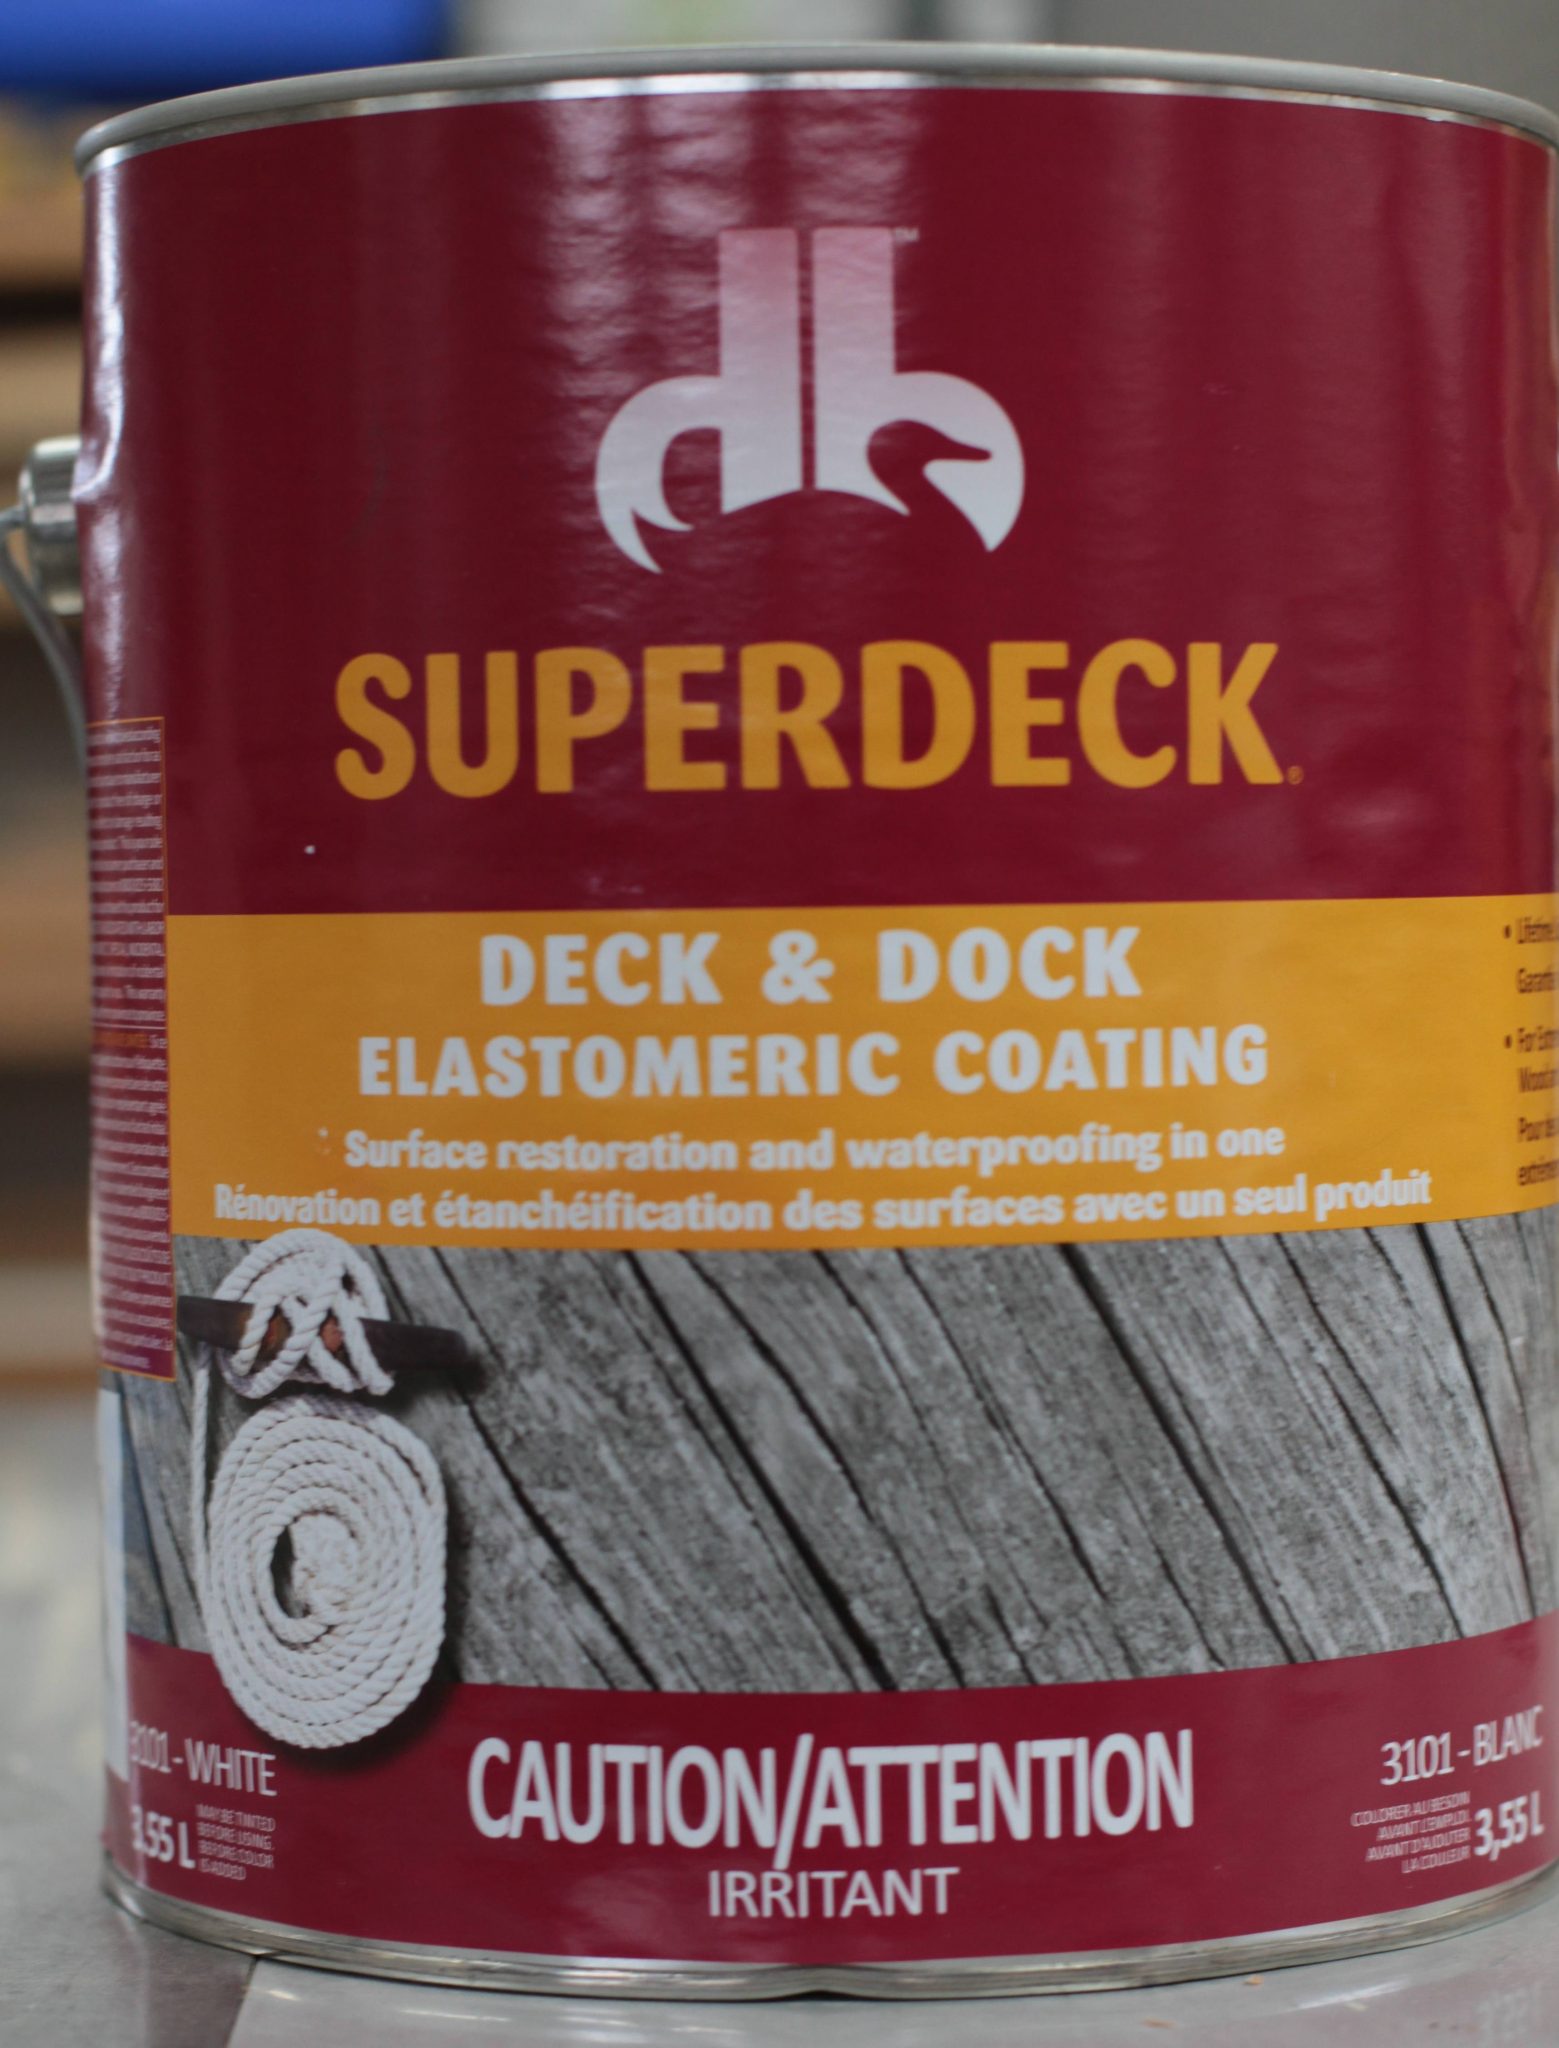 DECK STAIN: Why Most People Mess Up Their Deck Big-Time